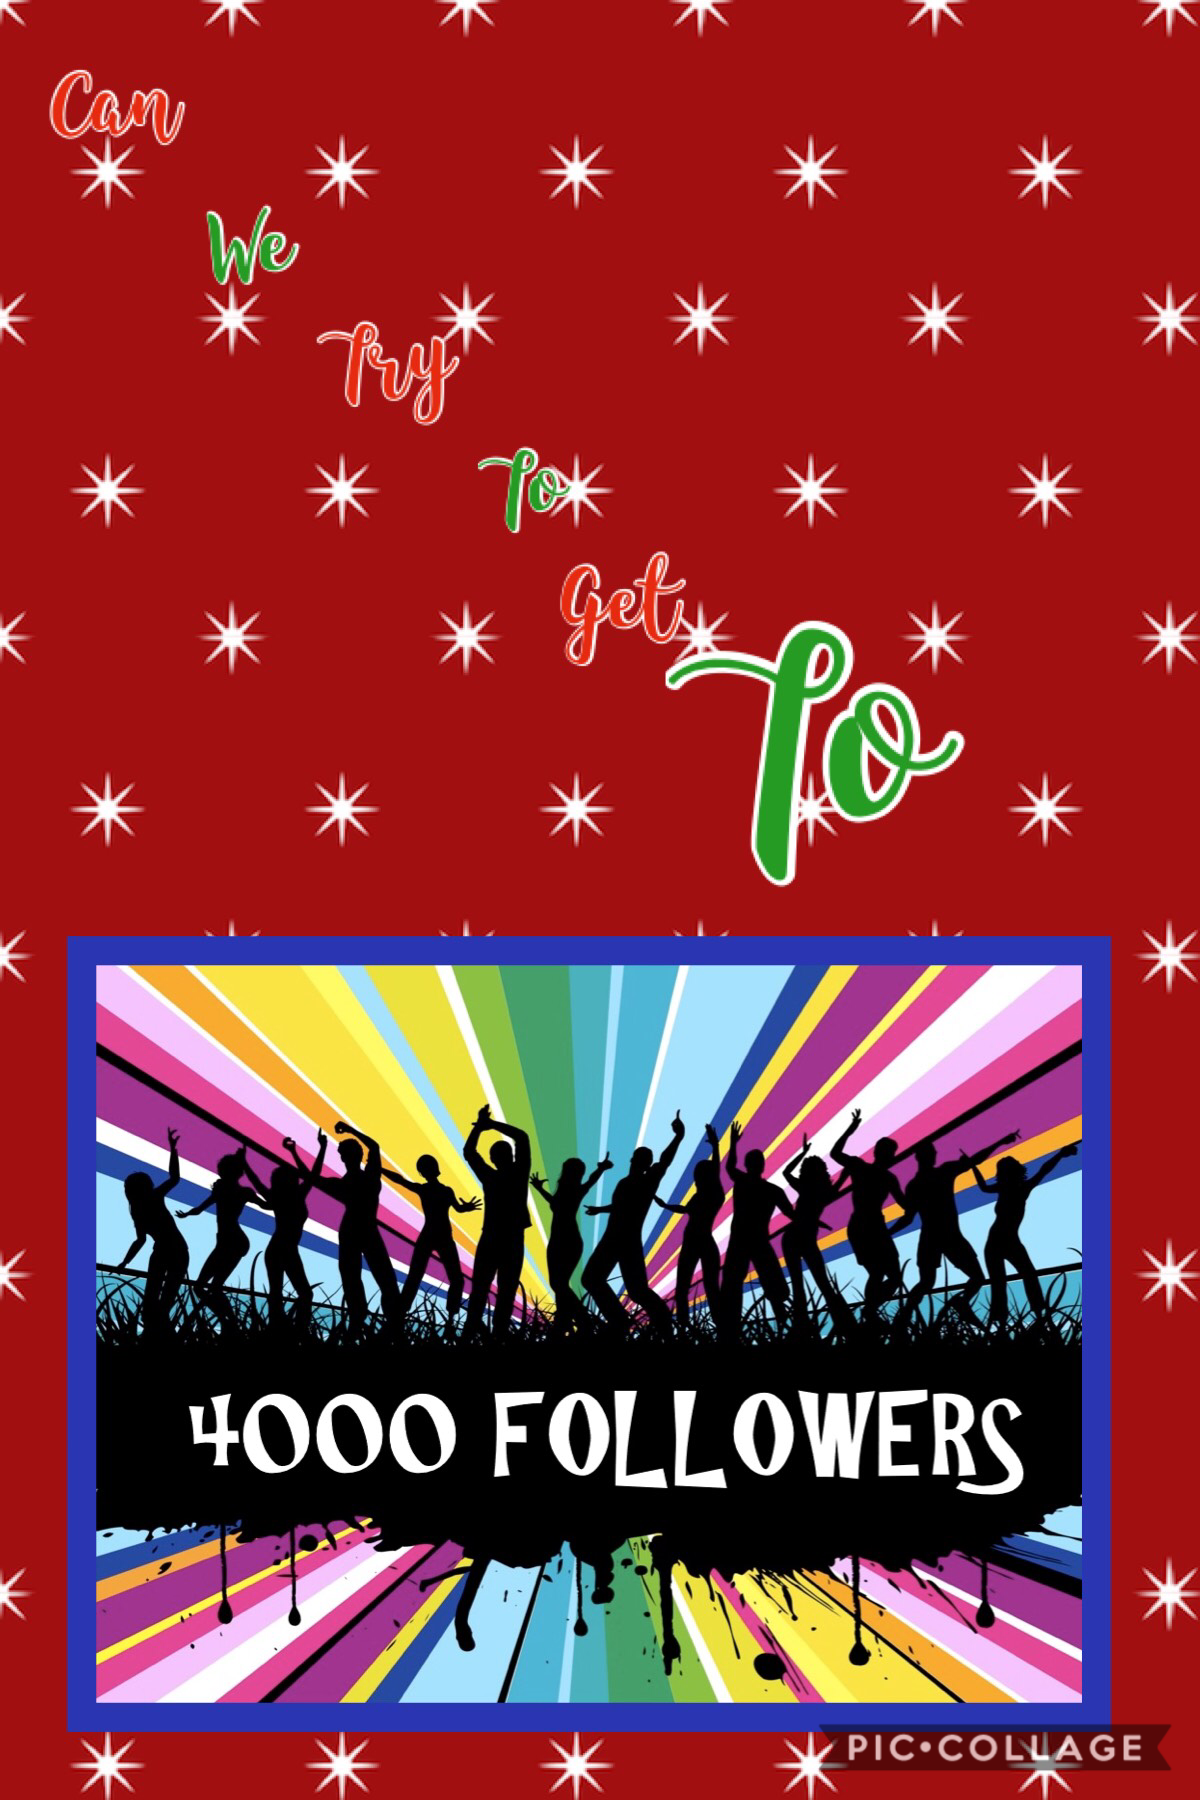 SHOUT OUT and FOLLOW to EVERYBODY who helps REACH THE GOAL!!!!!!!!!!!!!!!!!!!